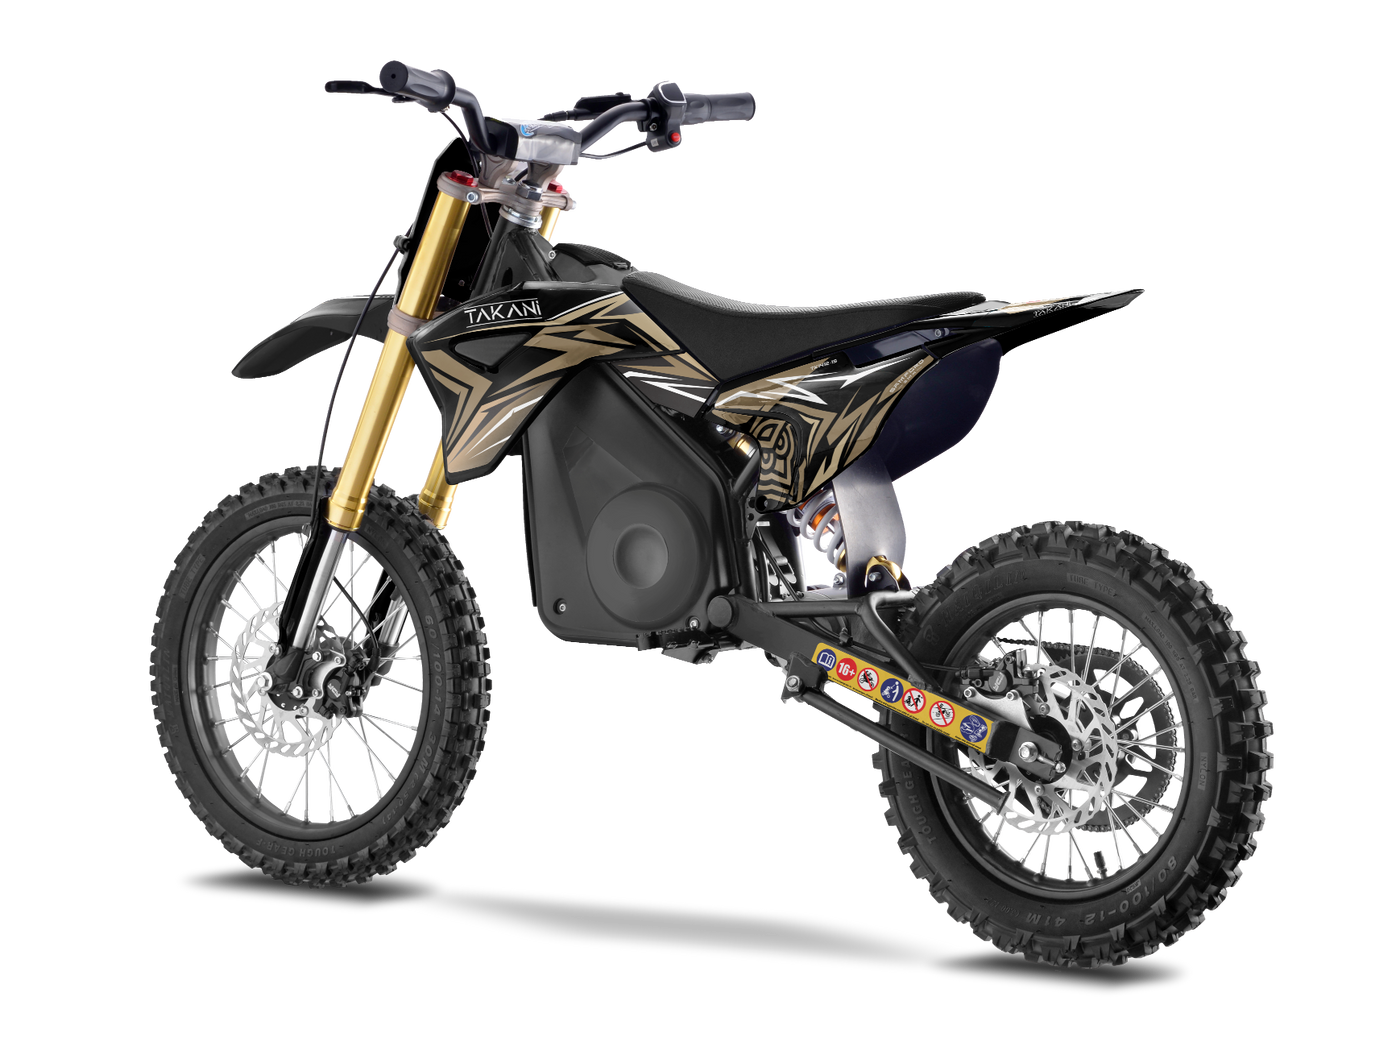 TAKANI electric dirt bikes for kids, this MIDI motocross bike is the perfect beginner bike for those looking to get into motocross or just have fun in the backyard.